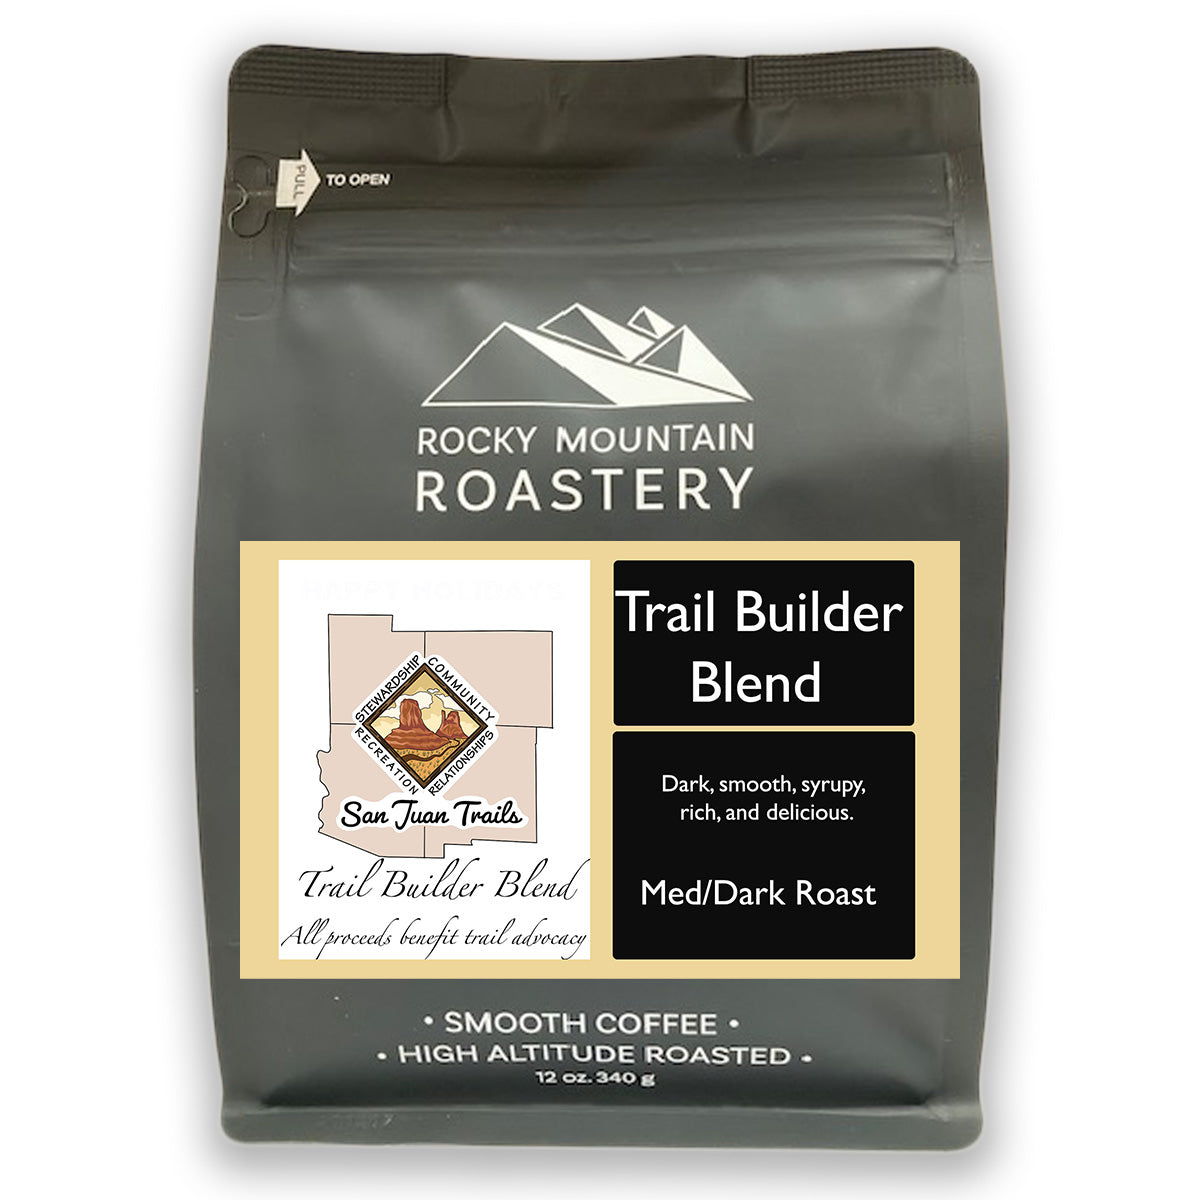 Picture of a bag of Trail Builder Blend Coffee